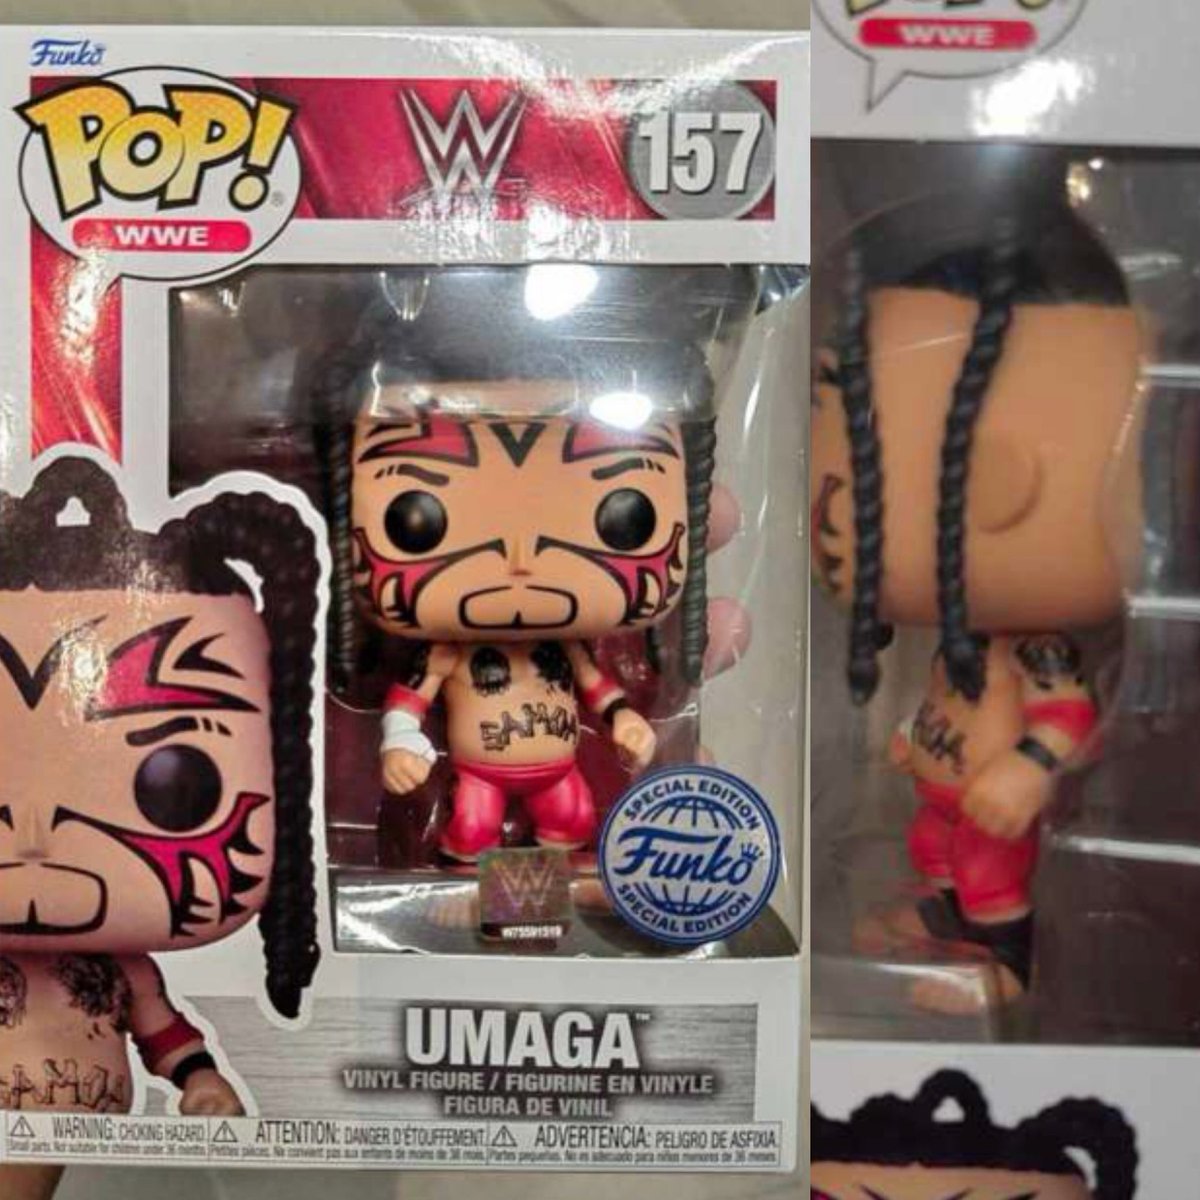 First look at Umaga Pop! Coming soon to a retailer. . Credit Reddit u/15YearTaco #WWE #wrestling #wrestler #Umaga #Funko #FunkoPop #FunkoPopVinyl #Pop #PopVinyl #Collectibles #Collectible #FunkoCollector #FunkoPops #Collector #Toy #Toys #DisTrackers